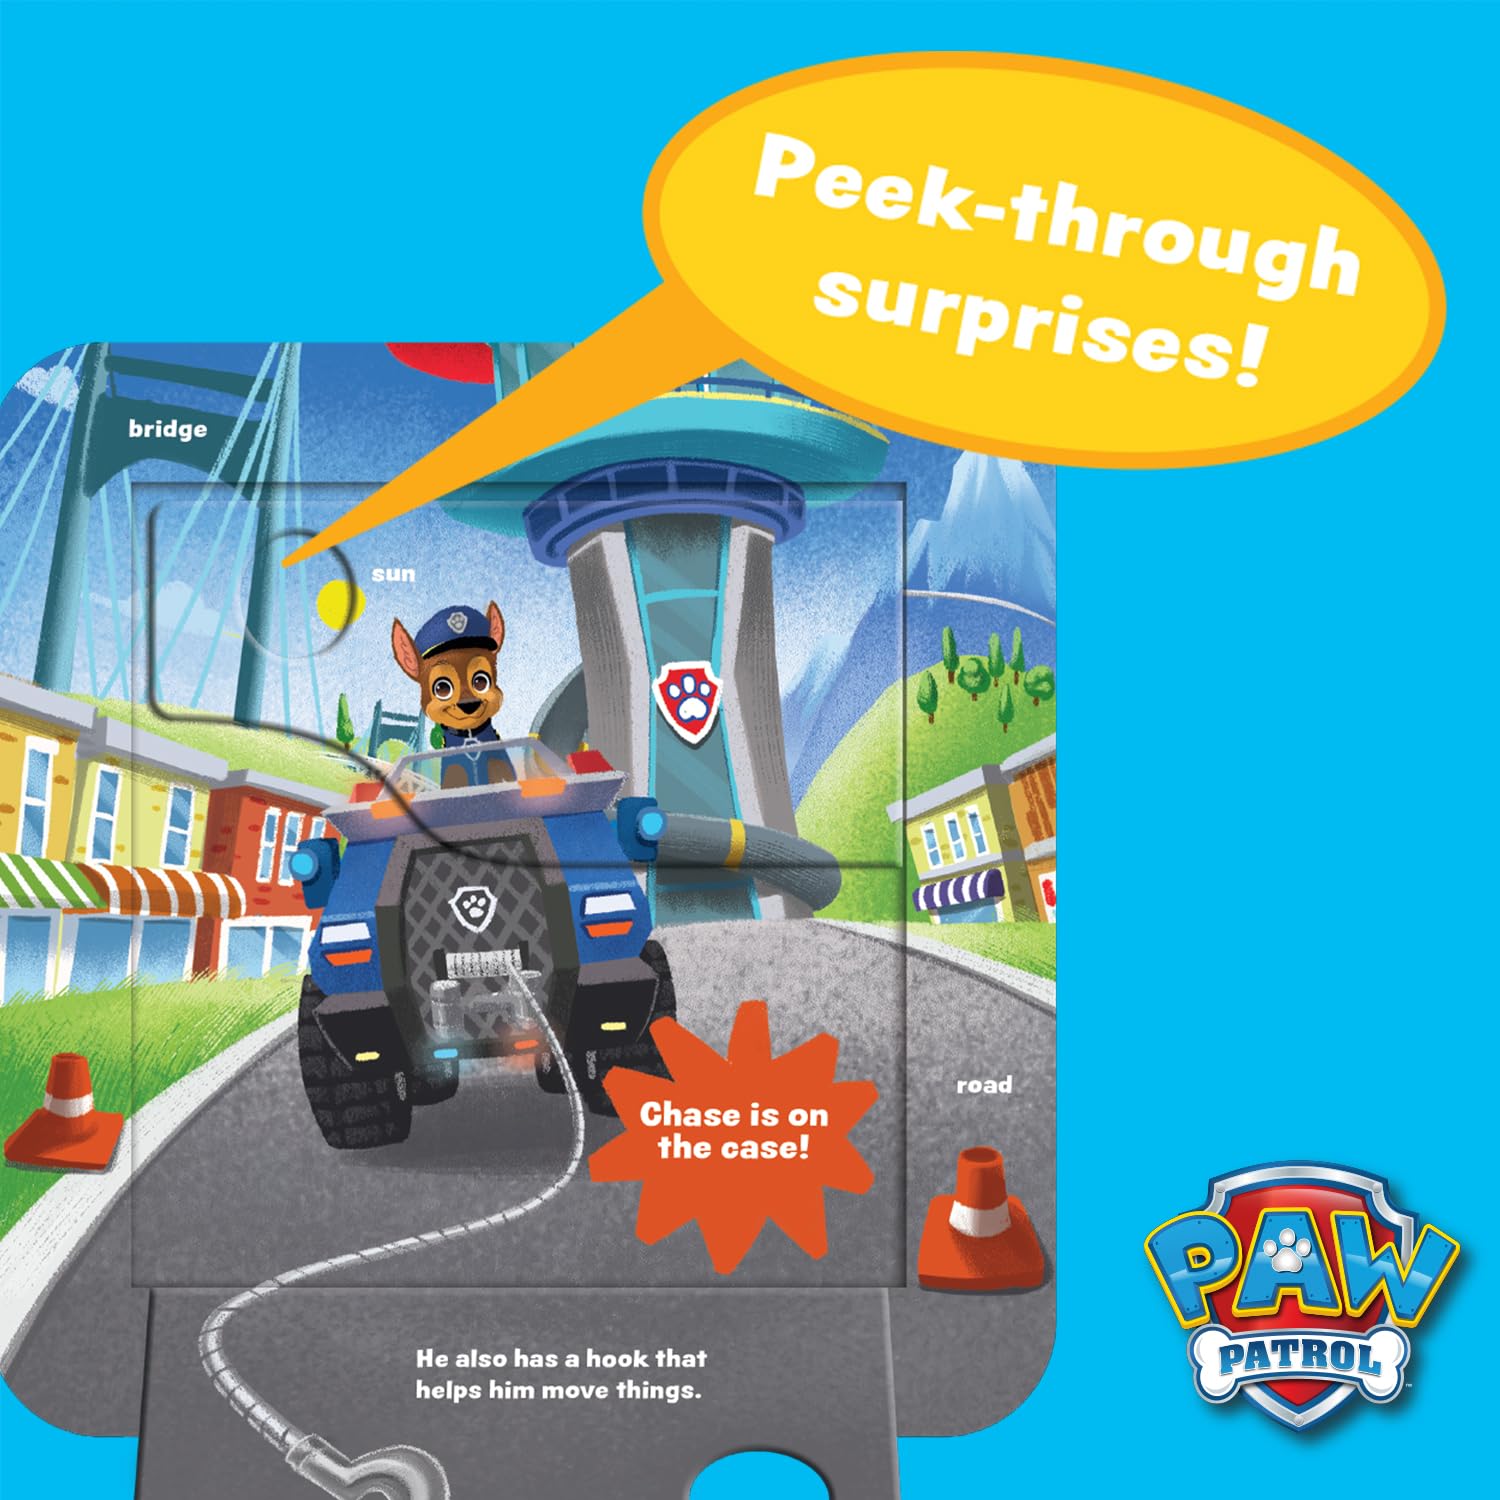 Peek-a-Flap Paw Patrol Go, Pups, Go! A Children’s Lift-a-Flap Board Book for Little Paw Patrol Lovers; Chase and Friends Interactive Adventure